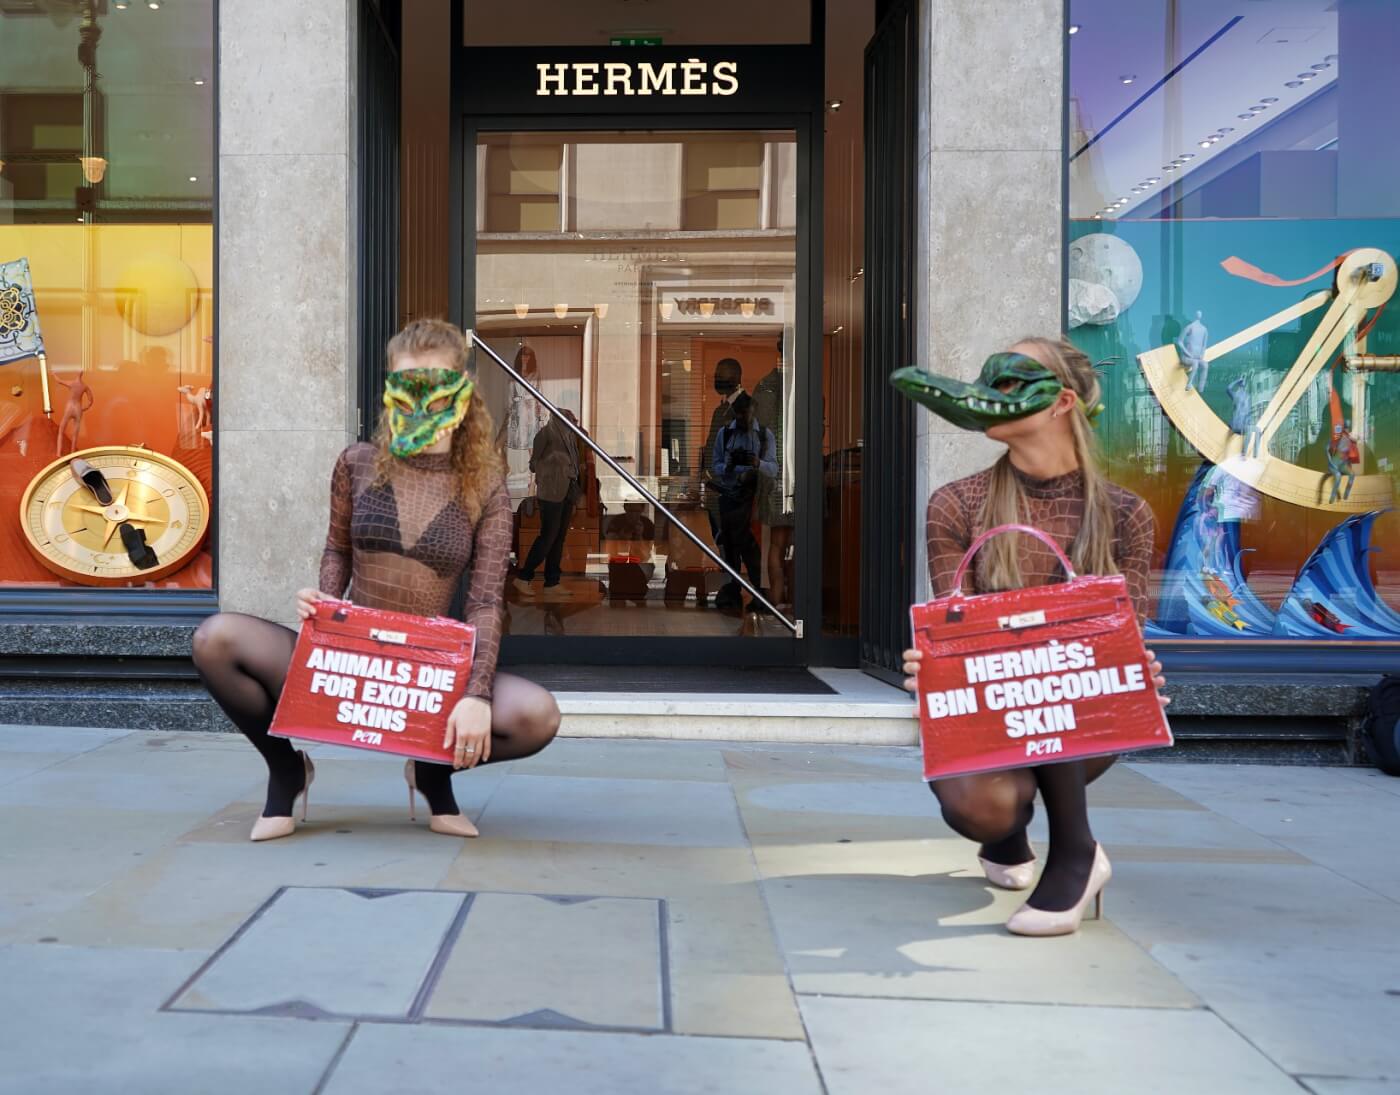 Activists protest use of exotic animal skins in Hermes bags